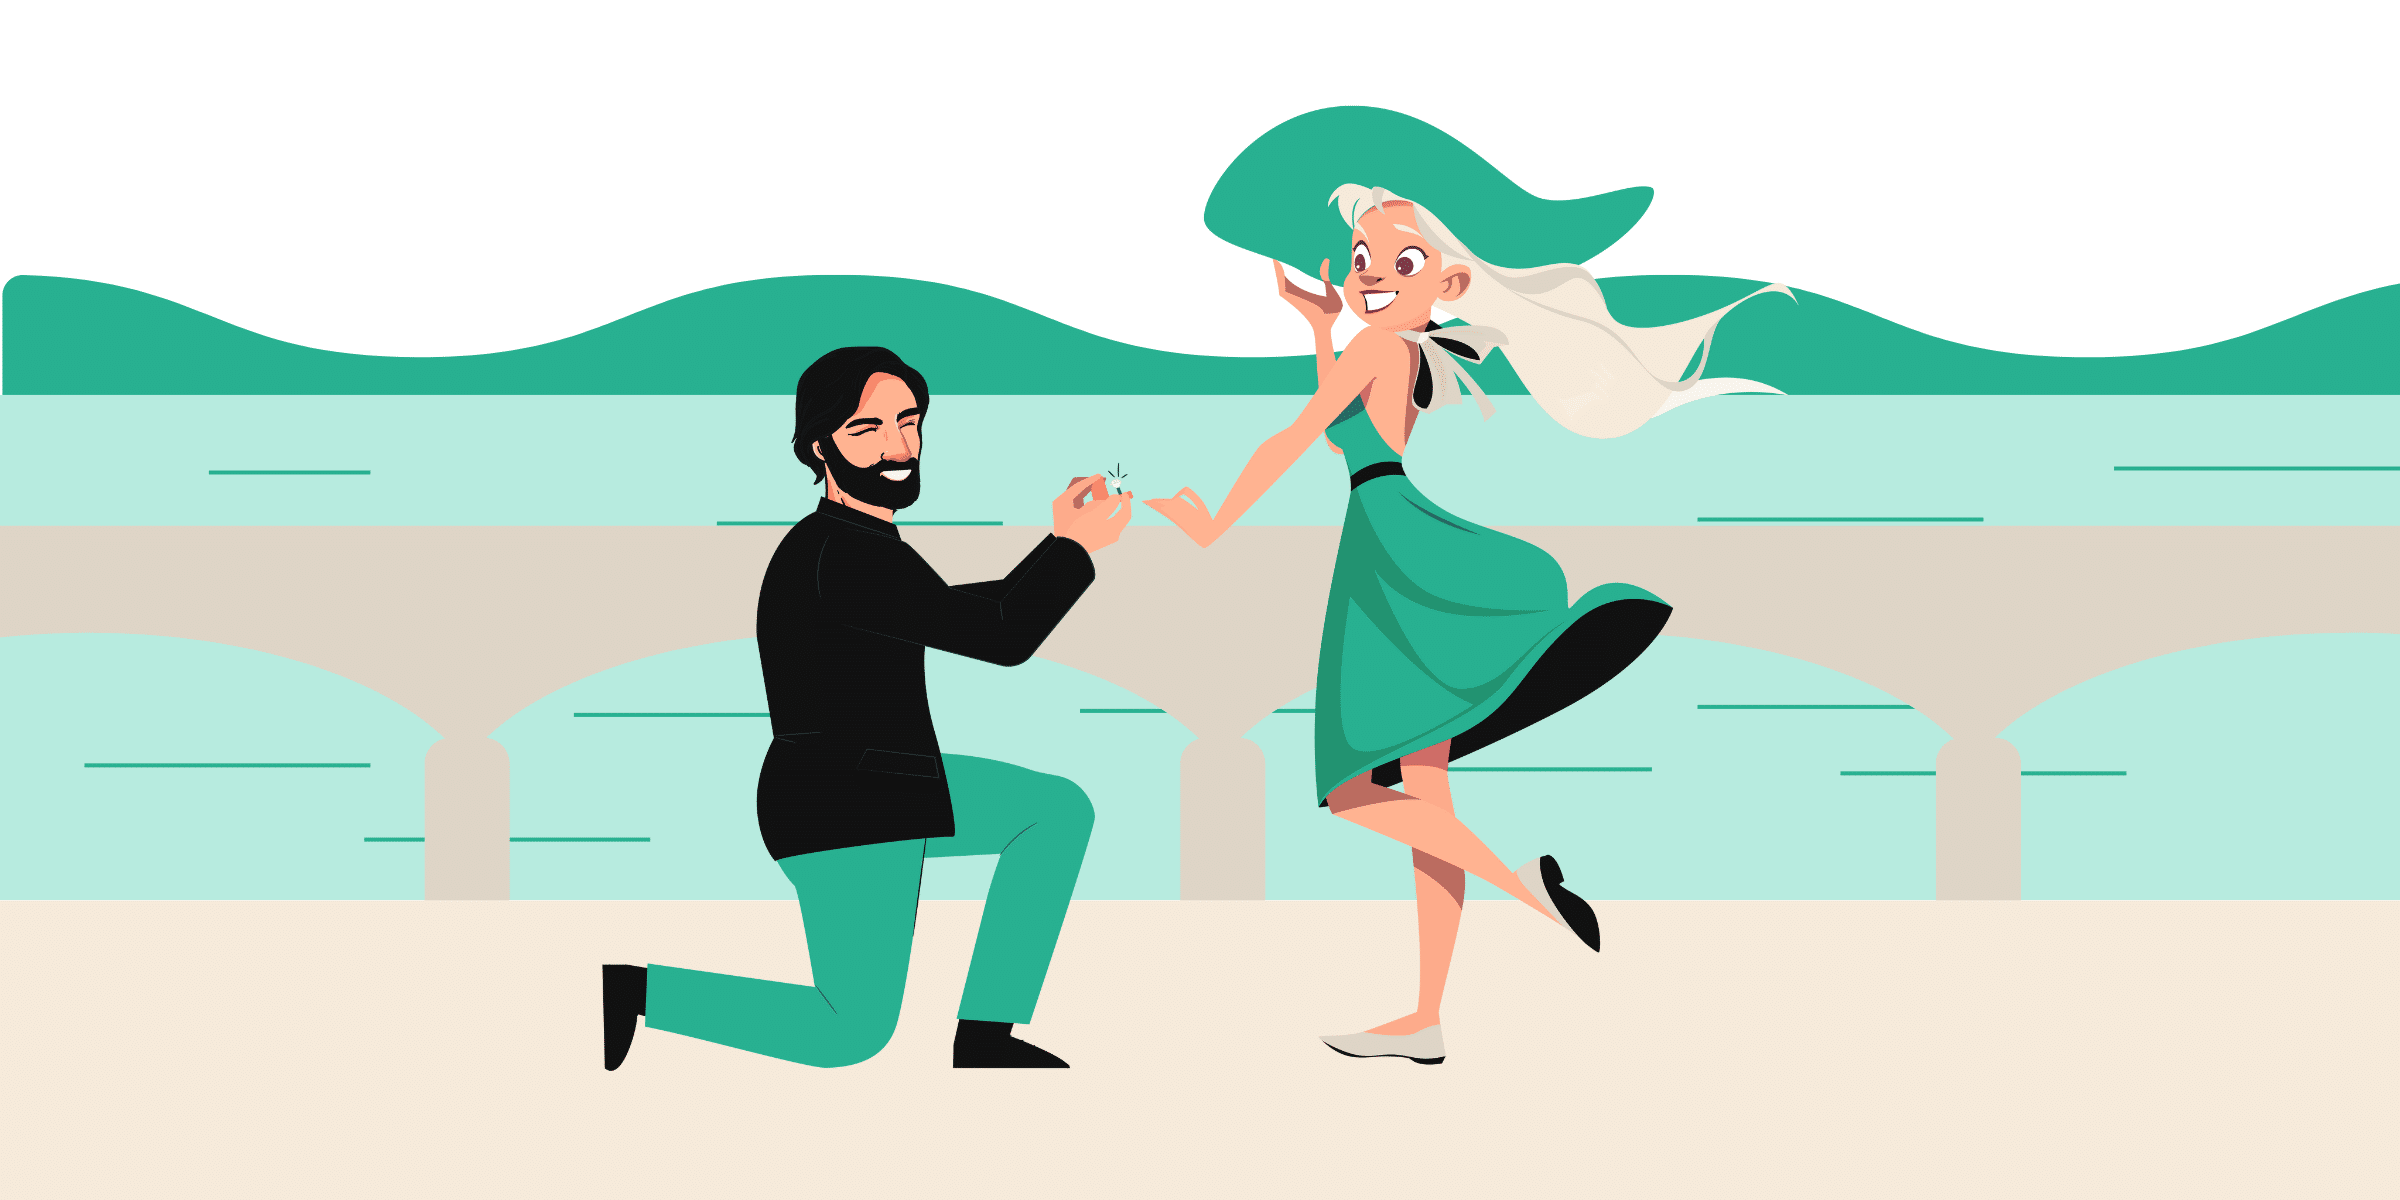 Wondering when to propose? Check out these ten signs you’re ready to propose to help you decide if now’s the time to pop the big question.